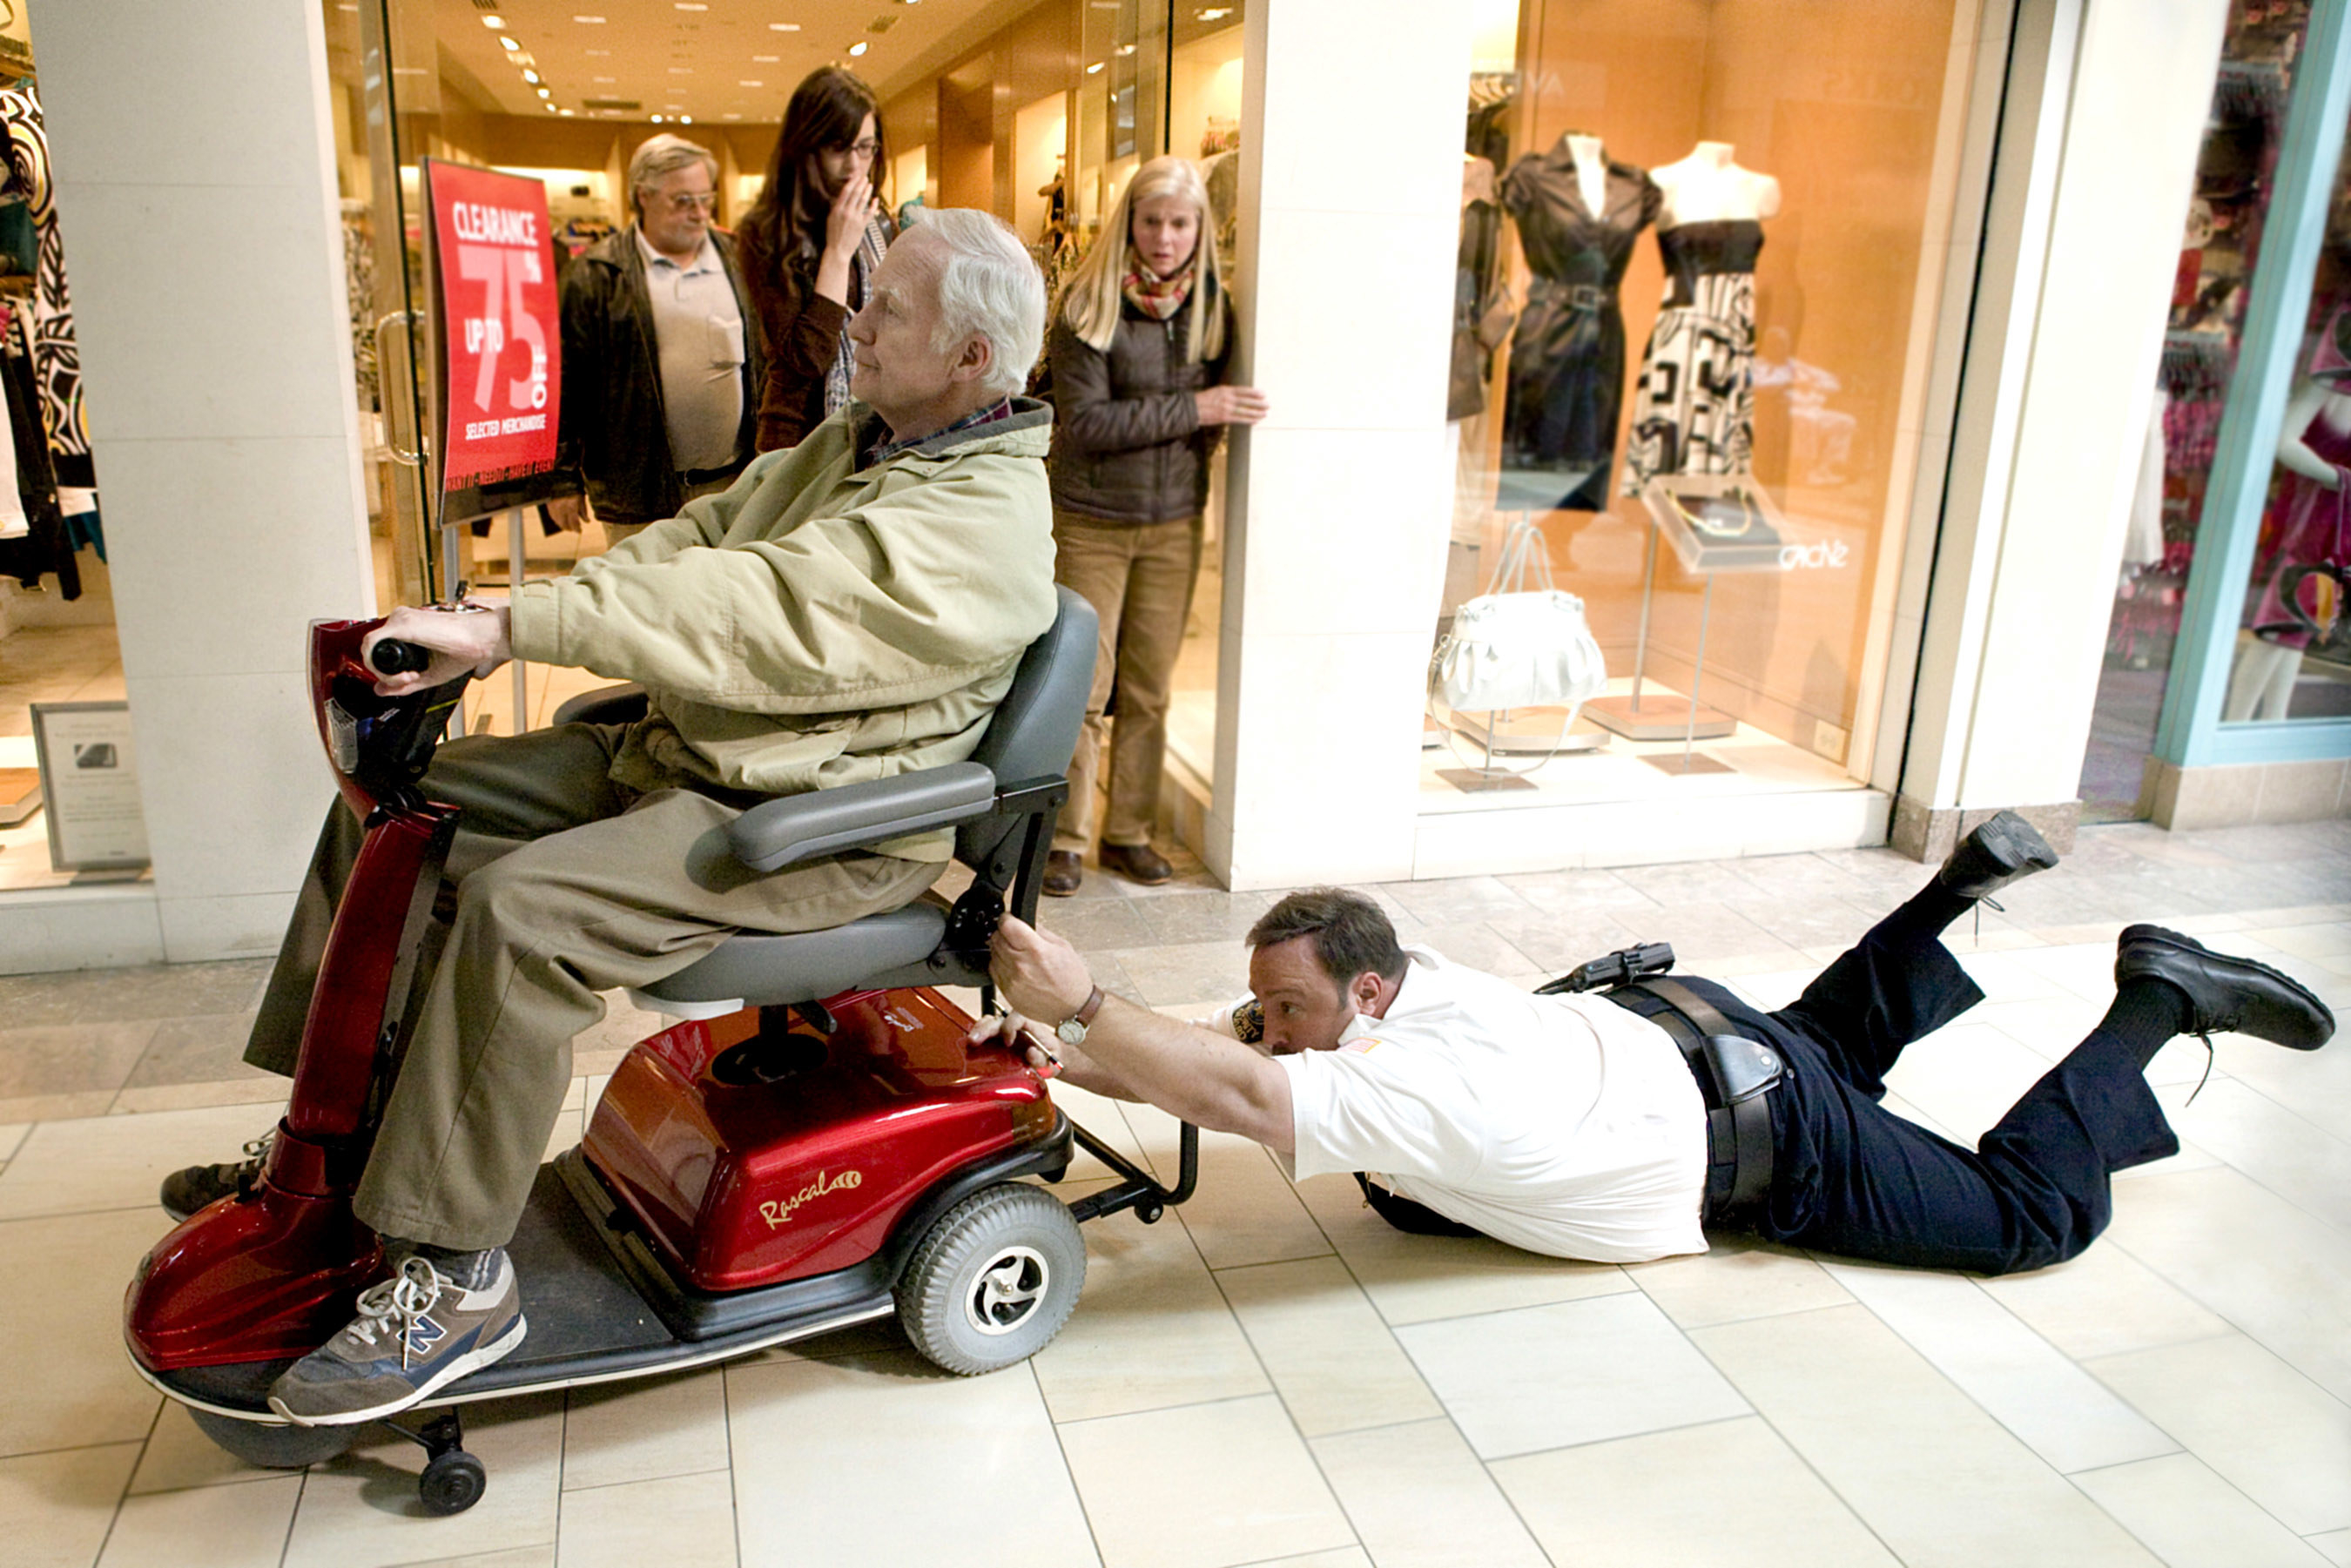 Paul Blart holding onto a man in a motor scooter and being dragged across the mall floor